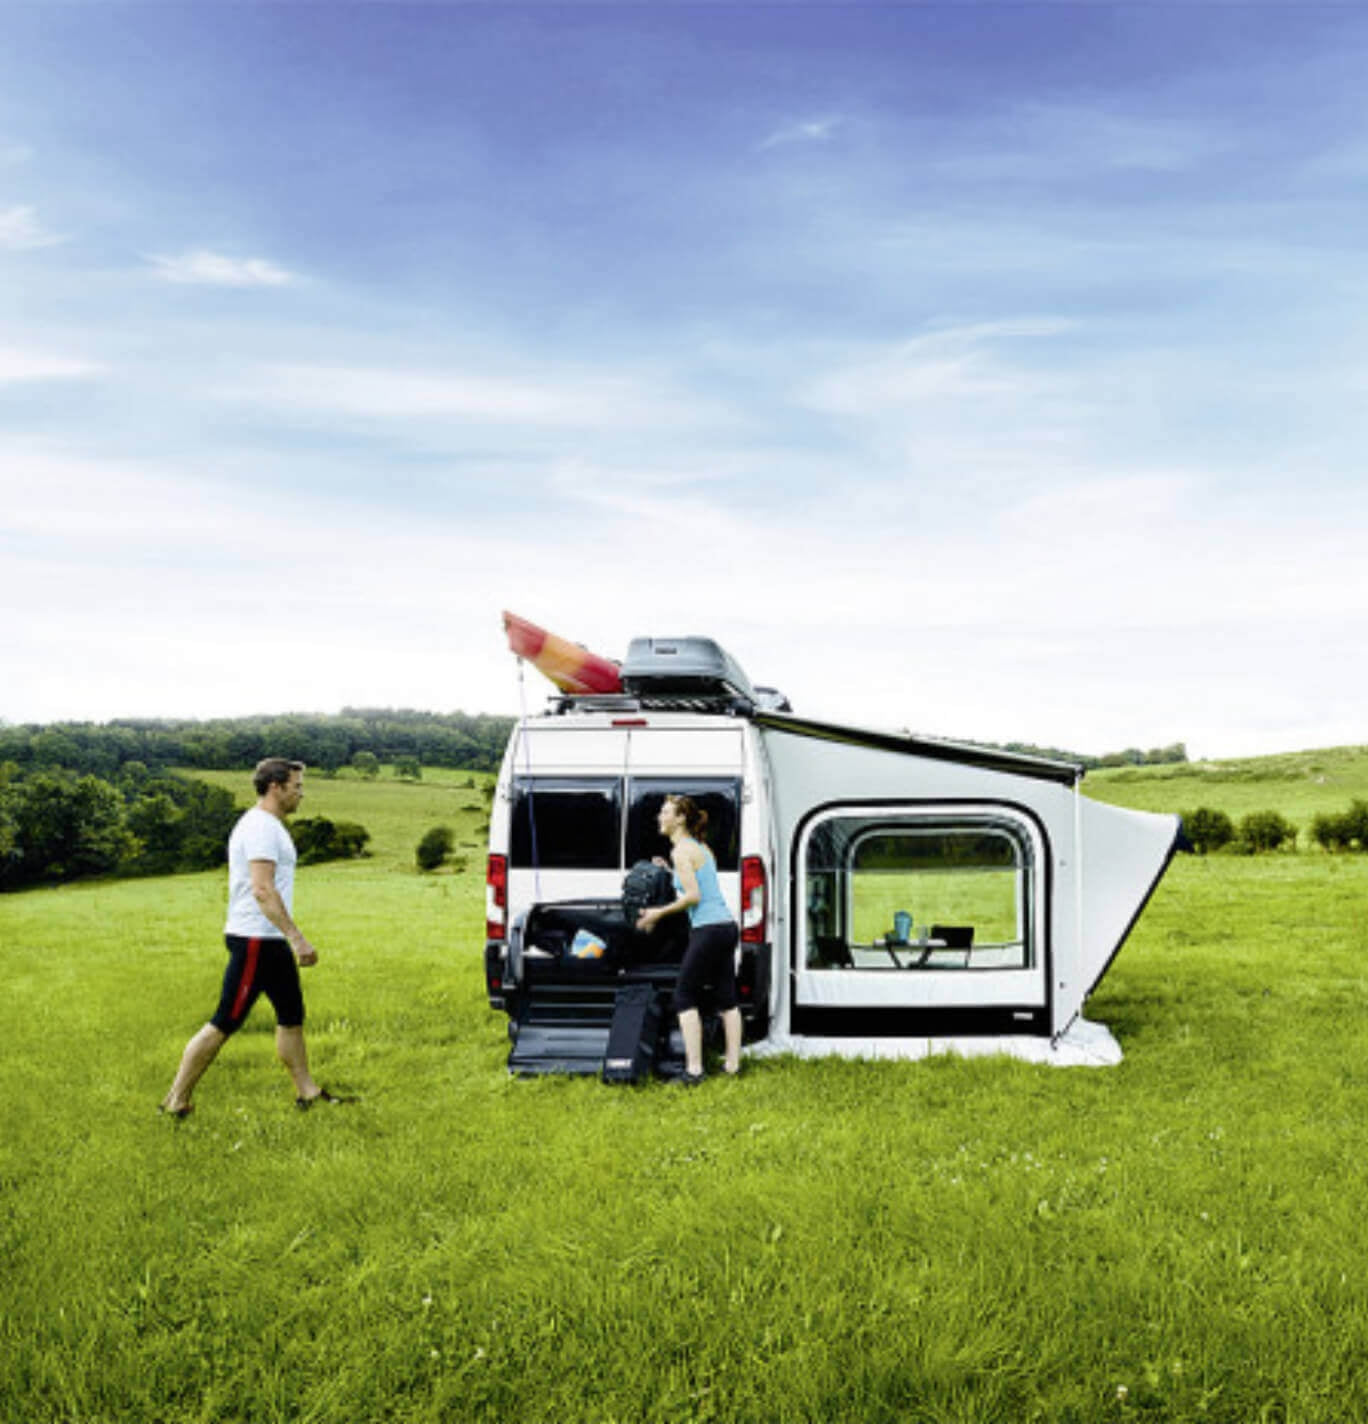 The omnistor 6300 pitched in a field with a privacy room